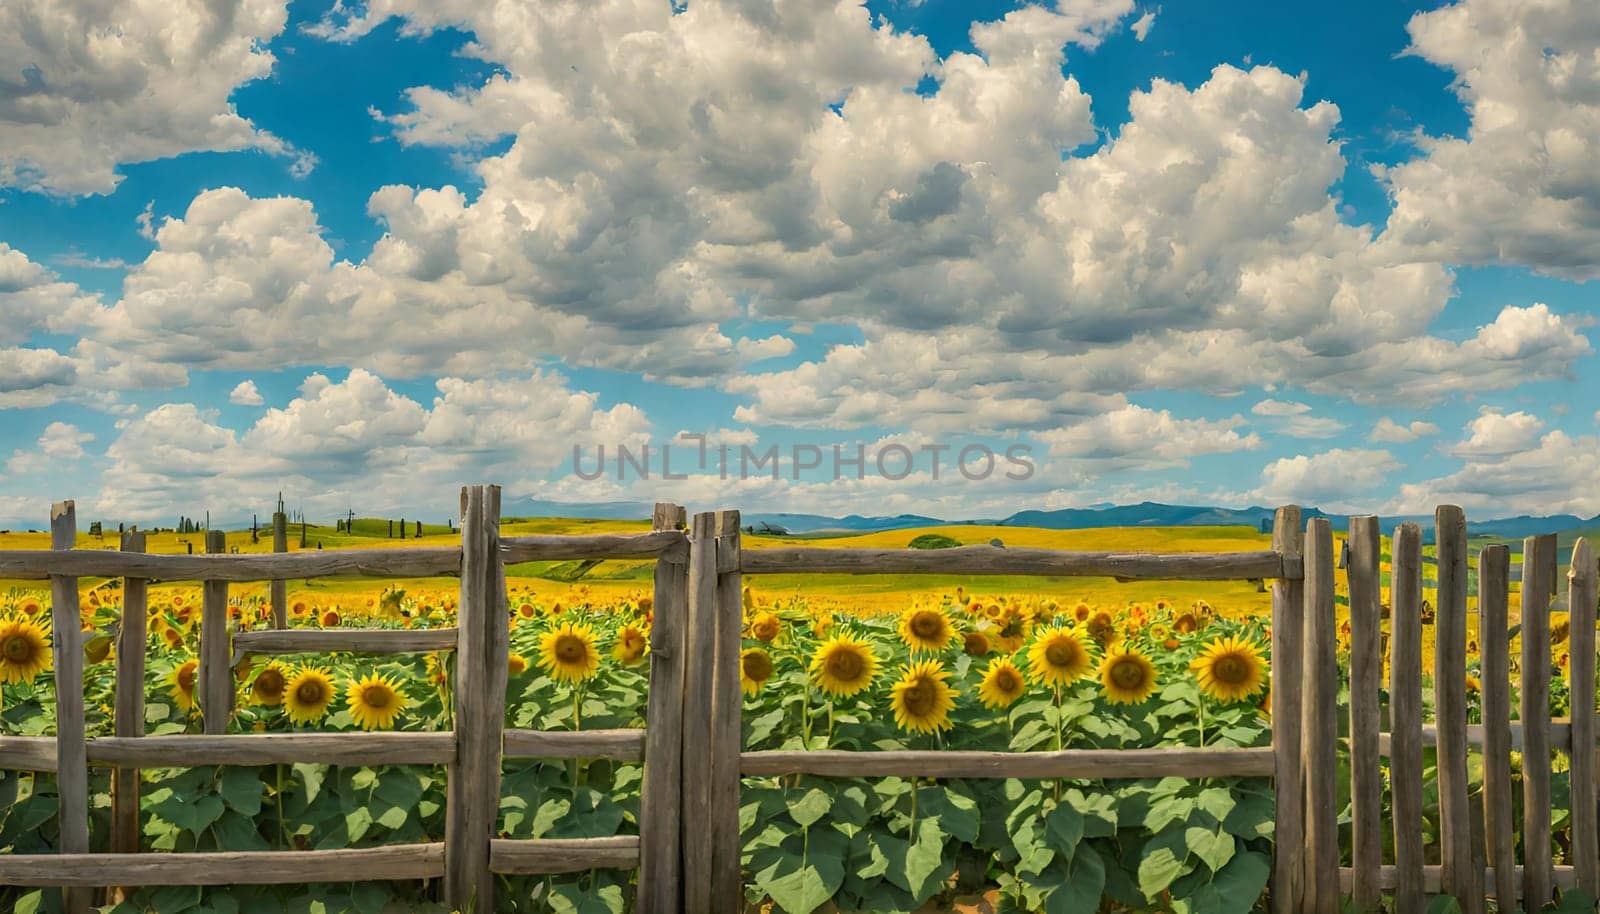 valentine's Day A field of sunflowers under a blue sky with white clouds. The sunflowers are yellow and bright. Happy Valentine's Day by Designlab